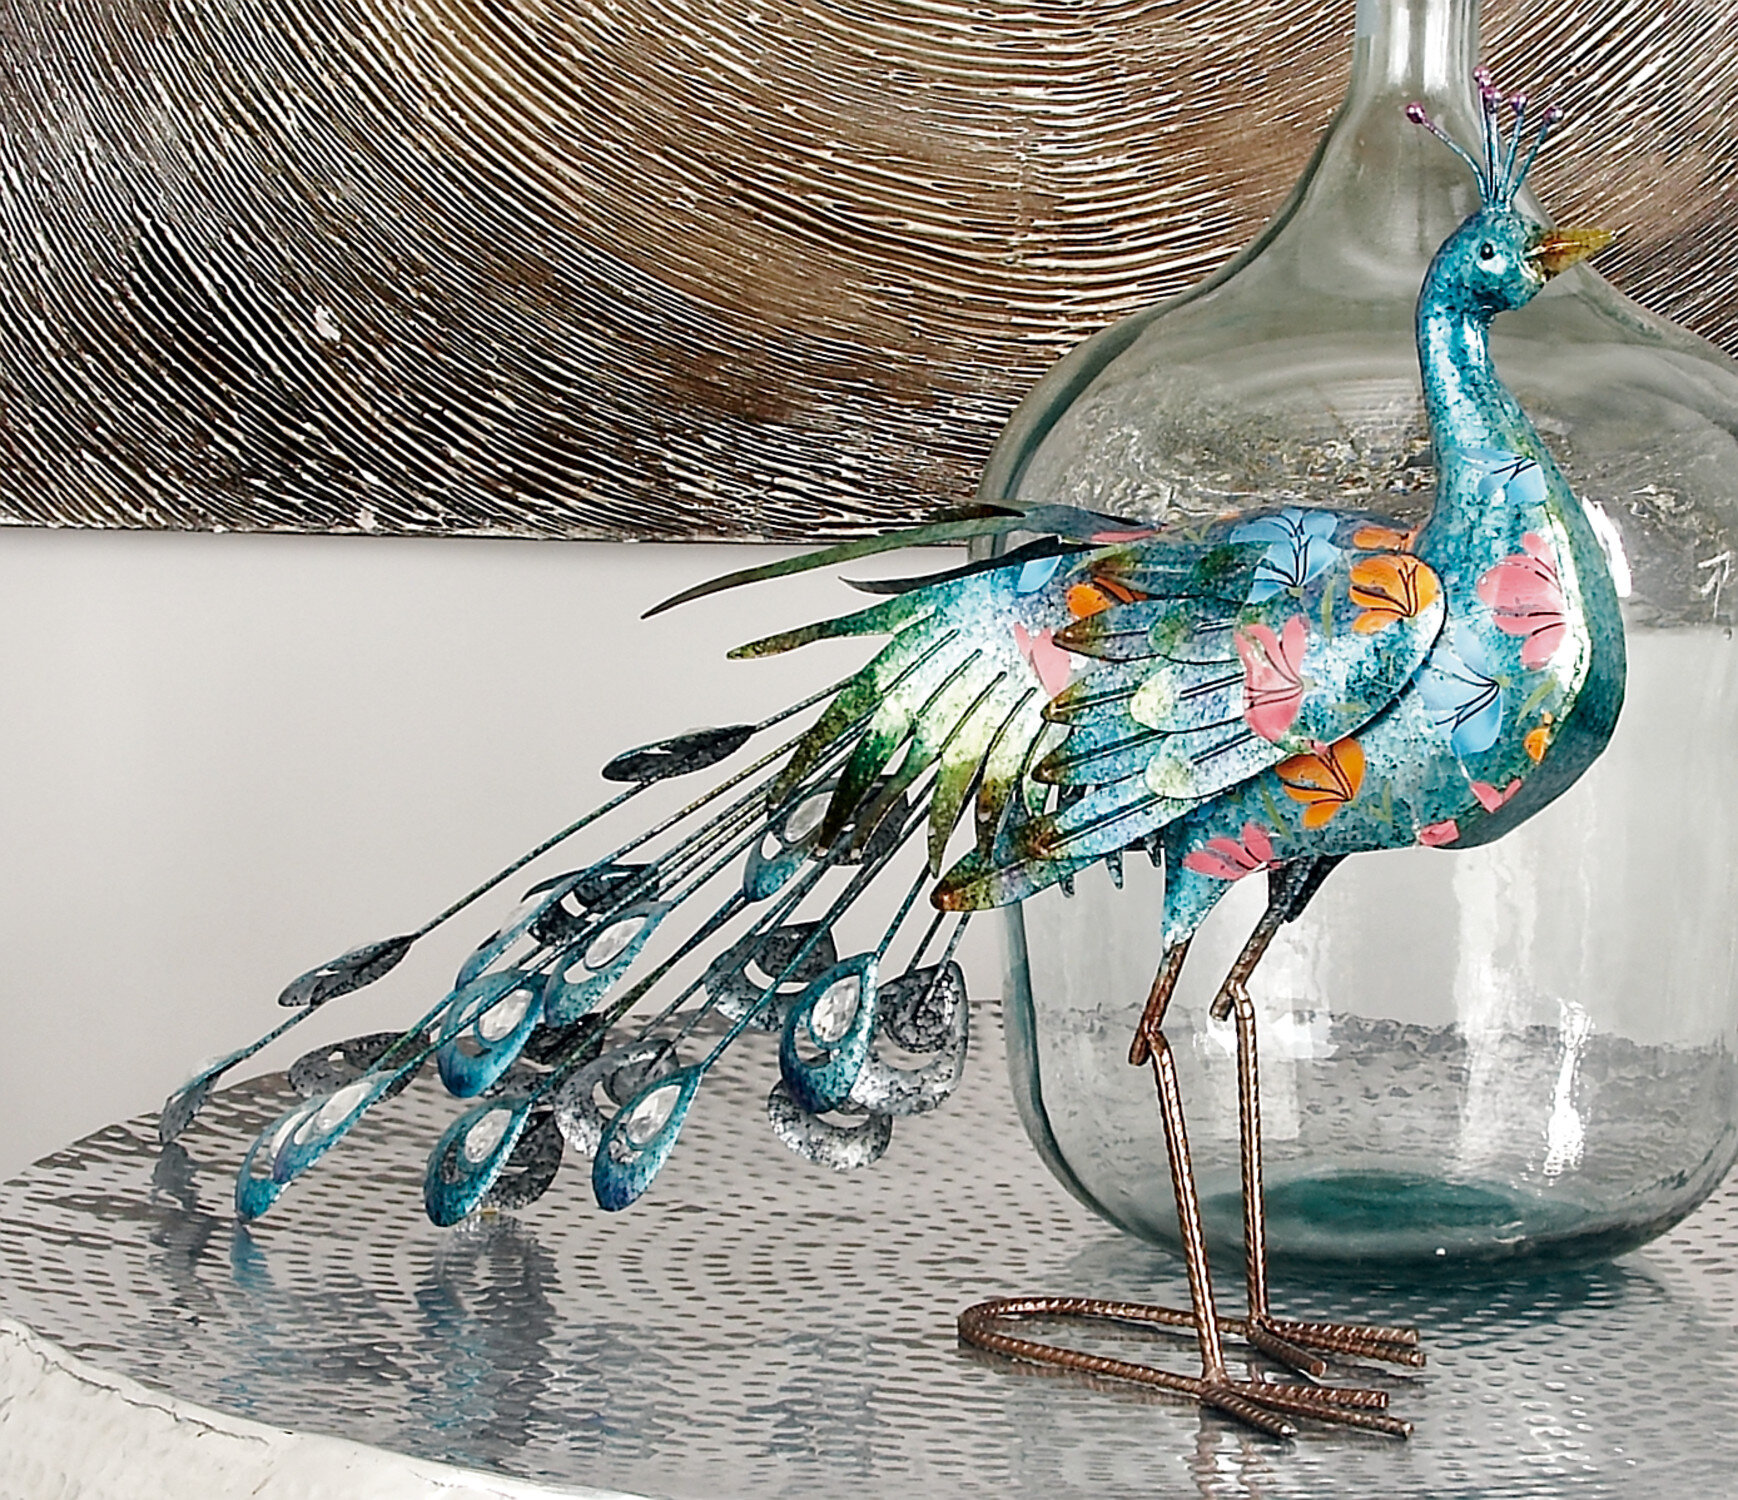 Peacock Hand Made Glass Figurine with long tail feathers wildlife Home Decor 